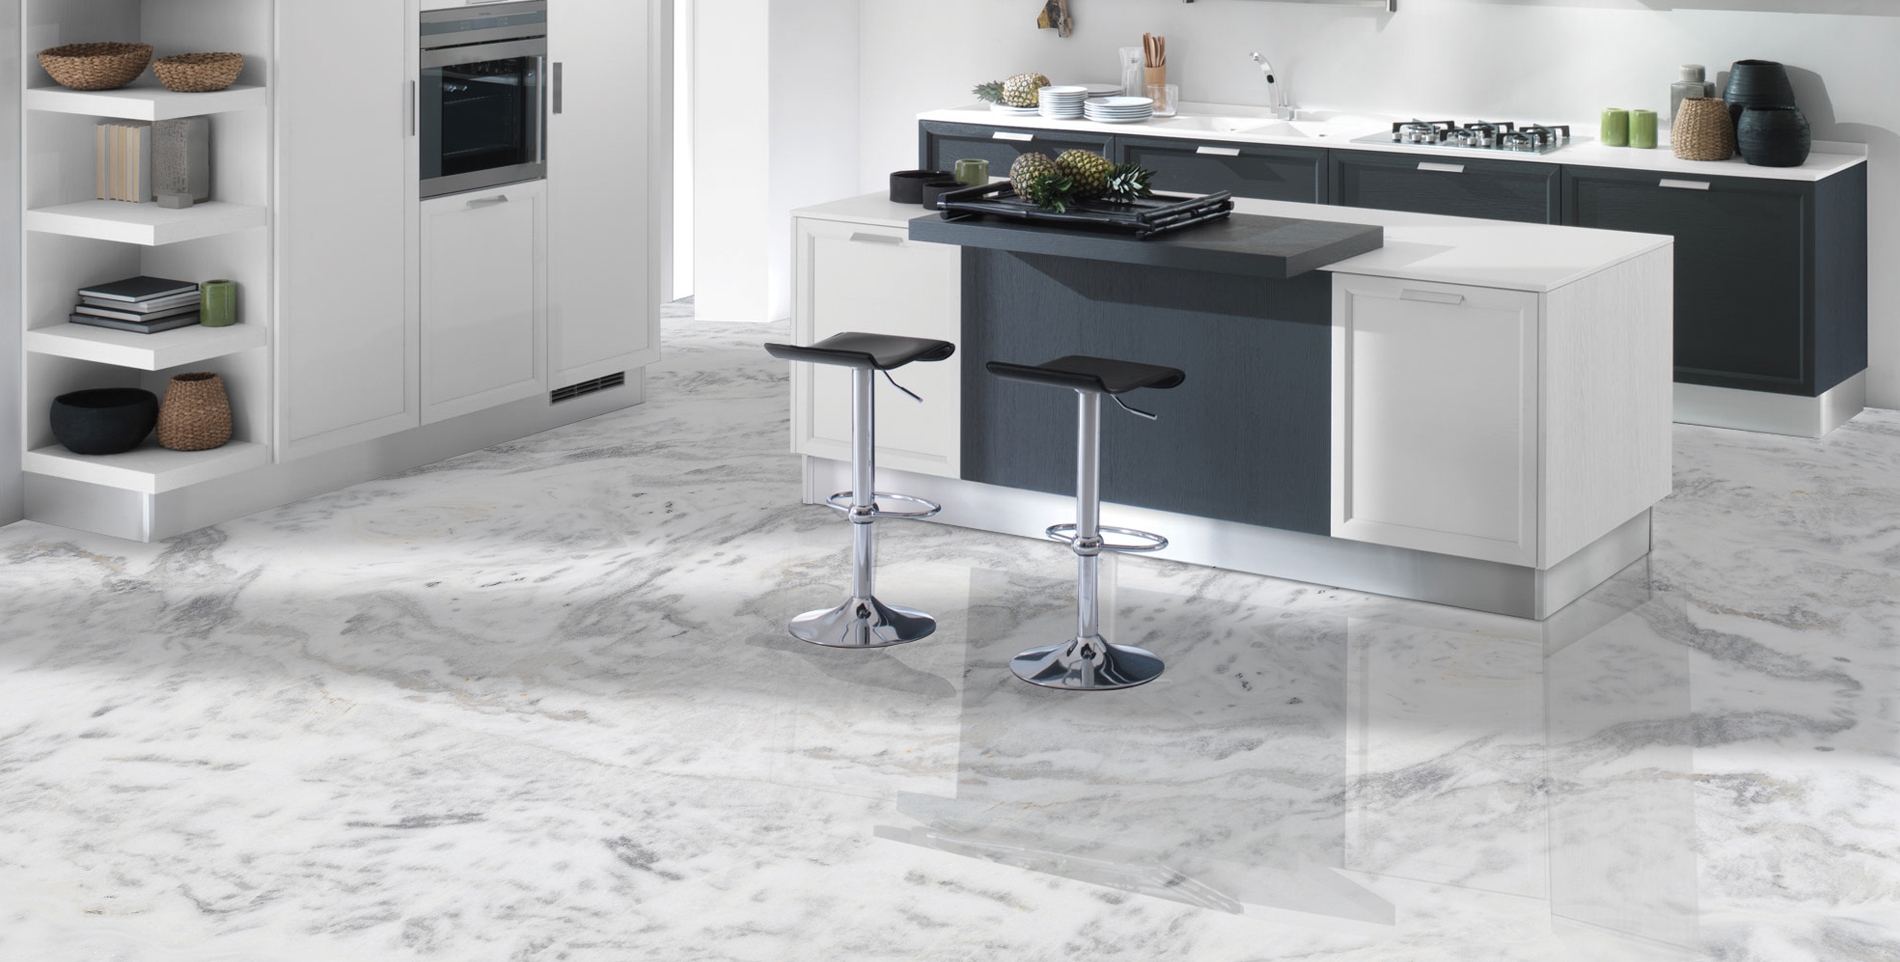 Marble Flooring Designs for Kitchen - Marble Company, Granite ...